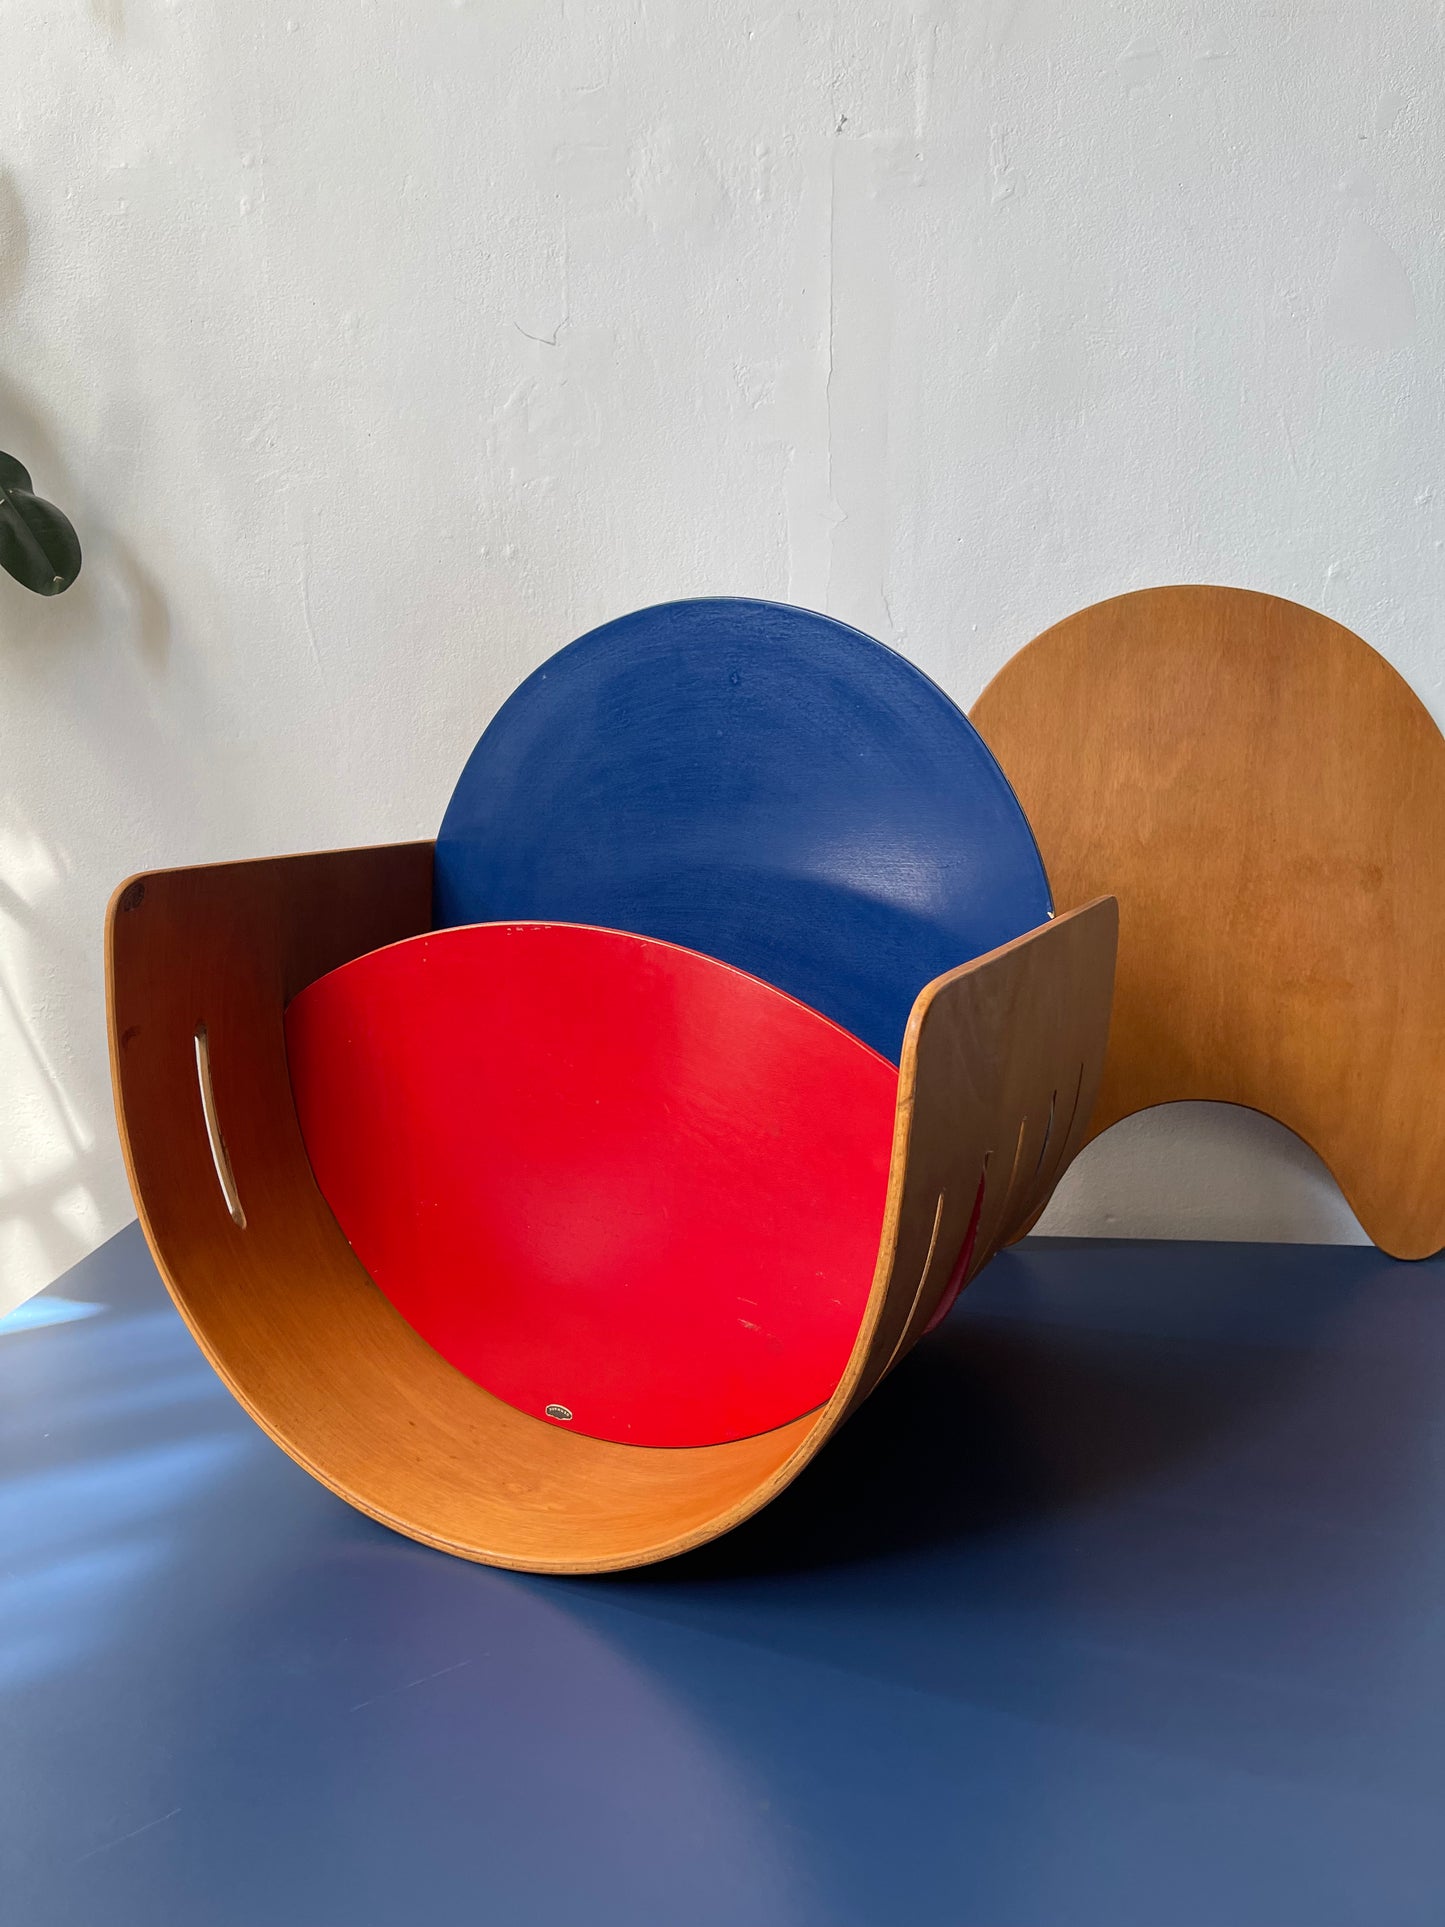 Child’s chair by Kristian Vedel, Denmark, 1950’s